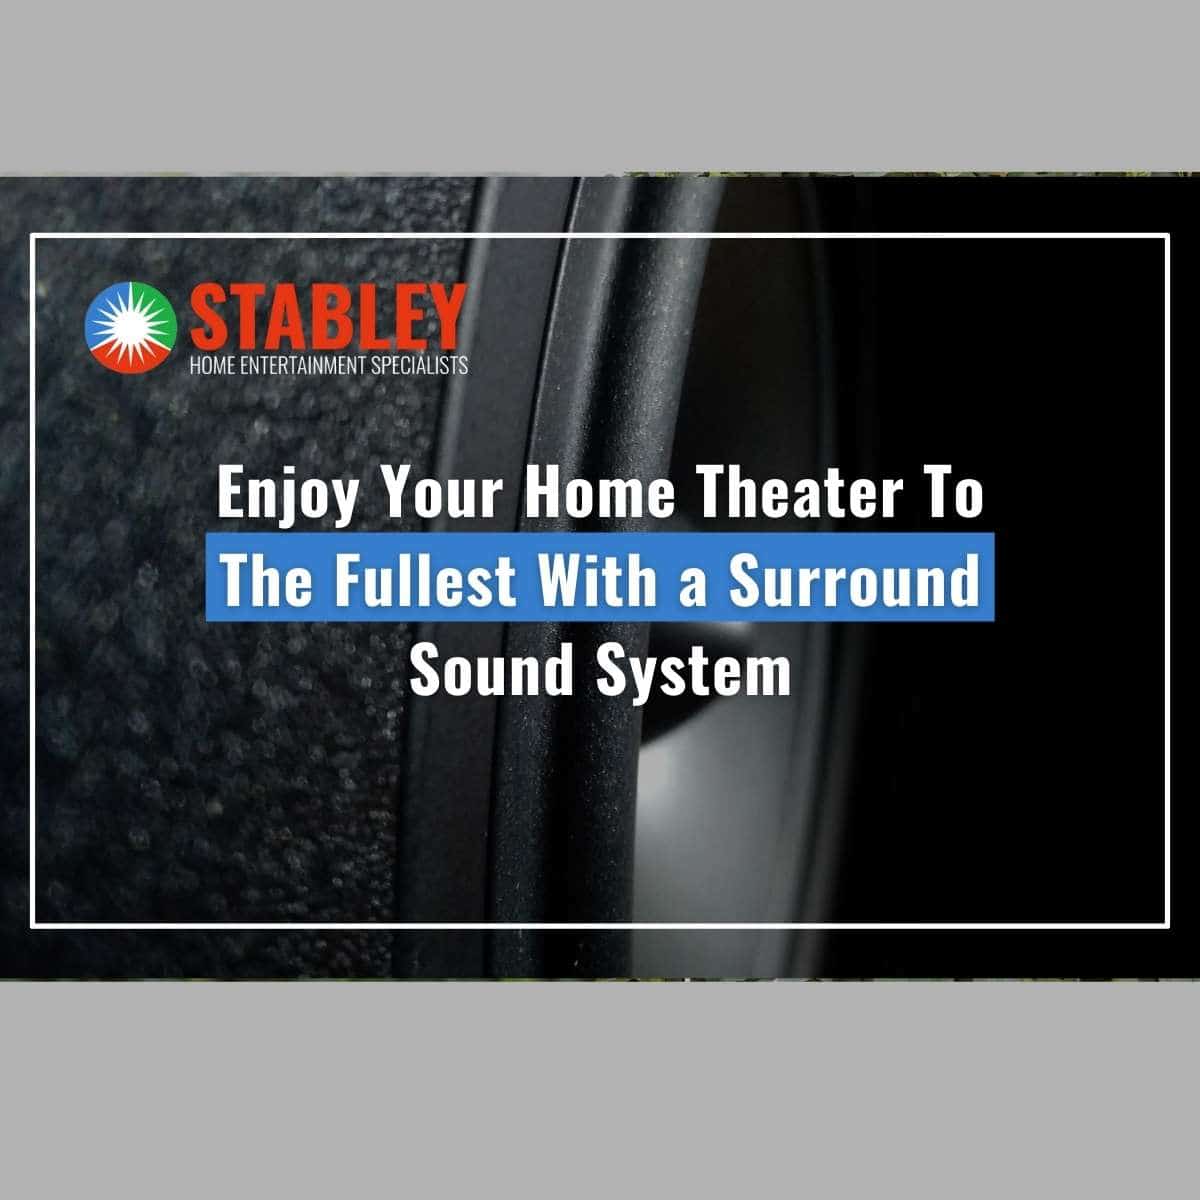 Enjoy Your Home Theater To The Fullest With a Surround Sound System